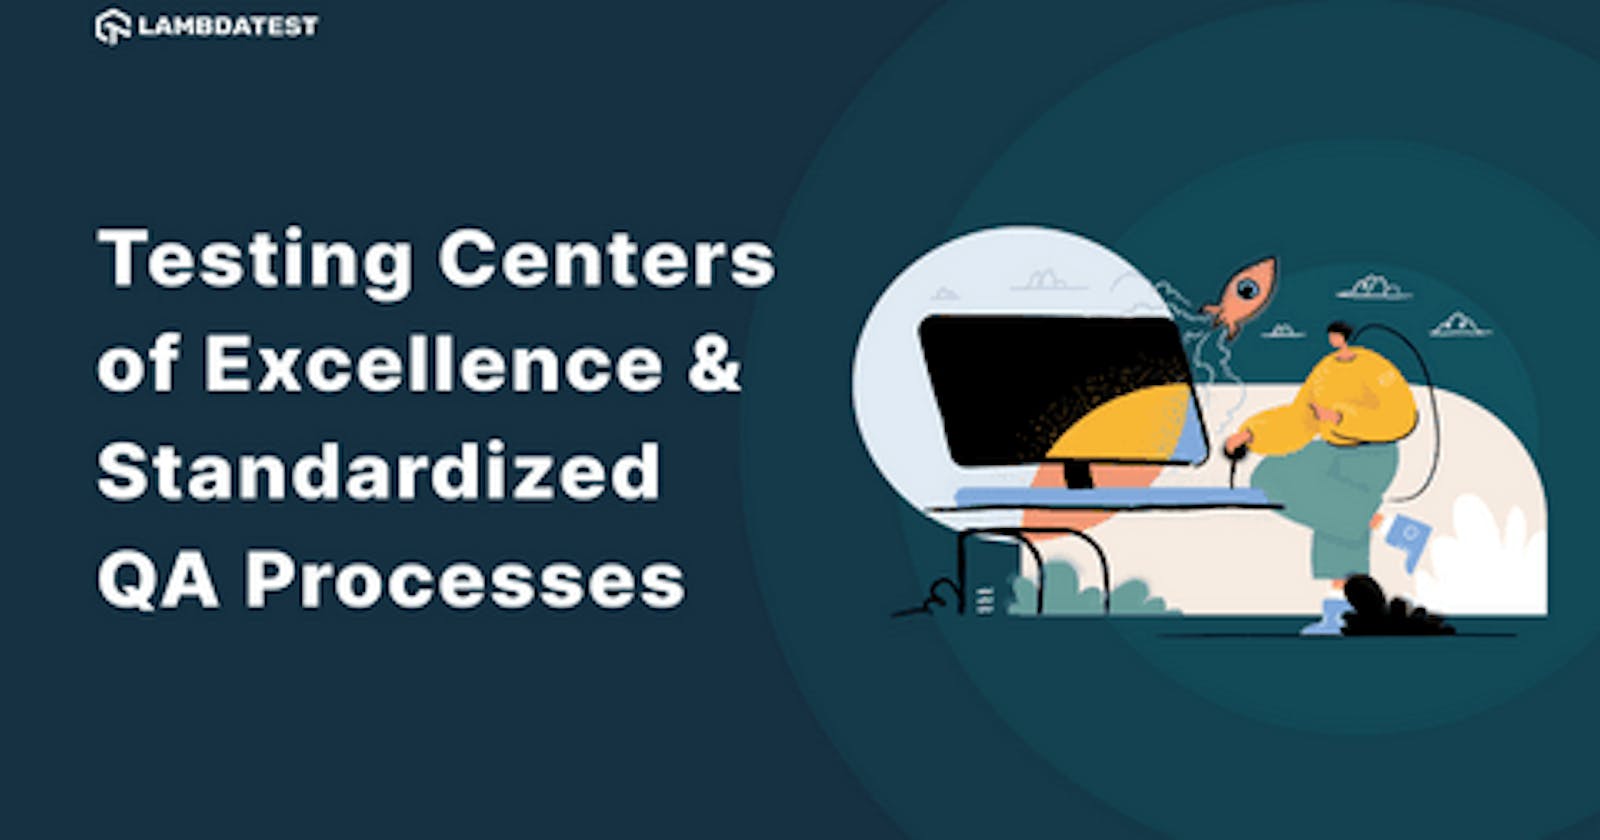 Testing Centers of Excellence & Standardized QA Processes